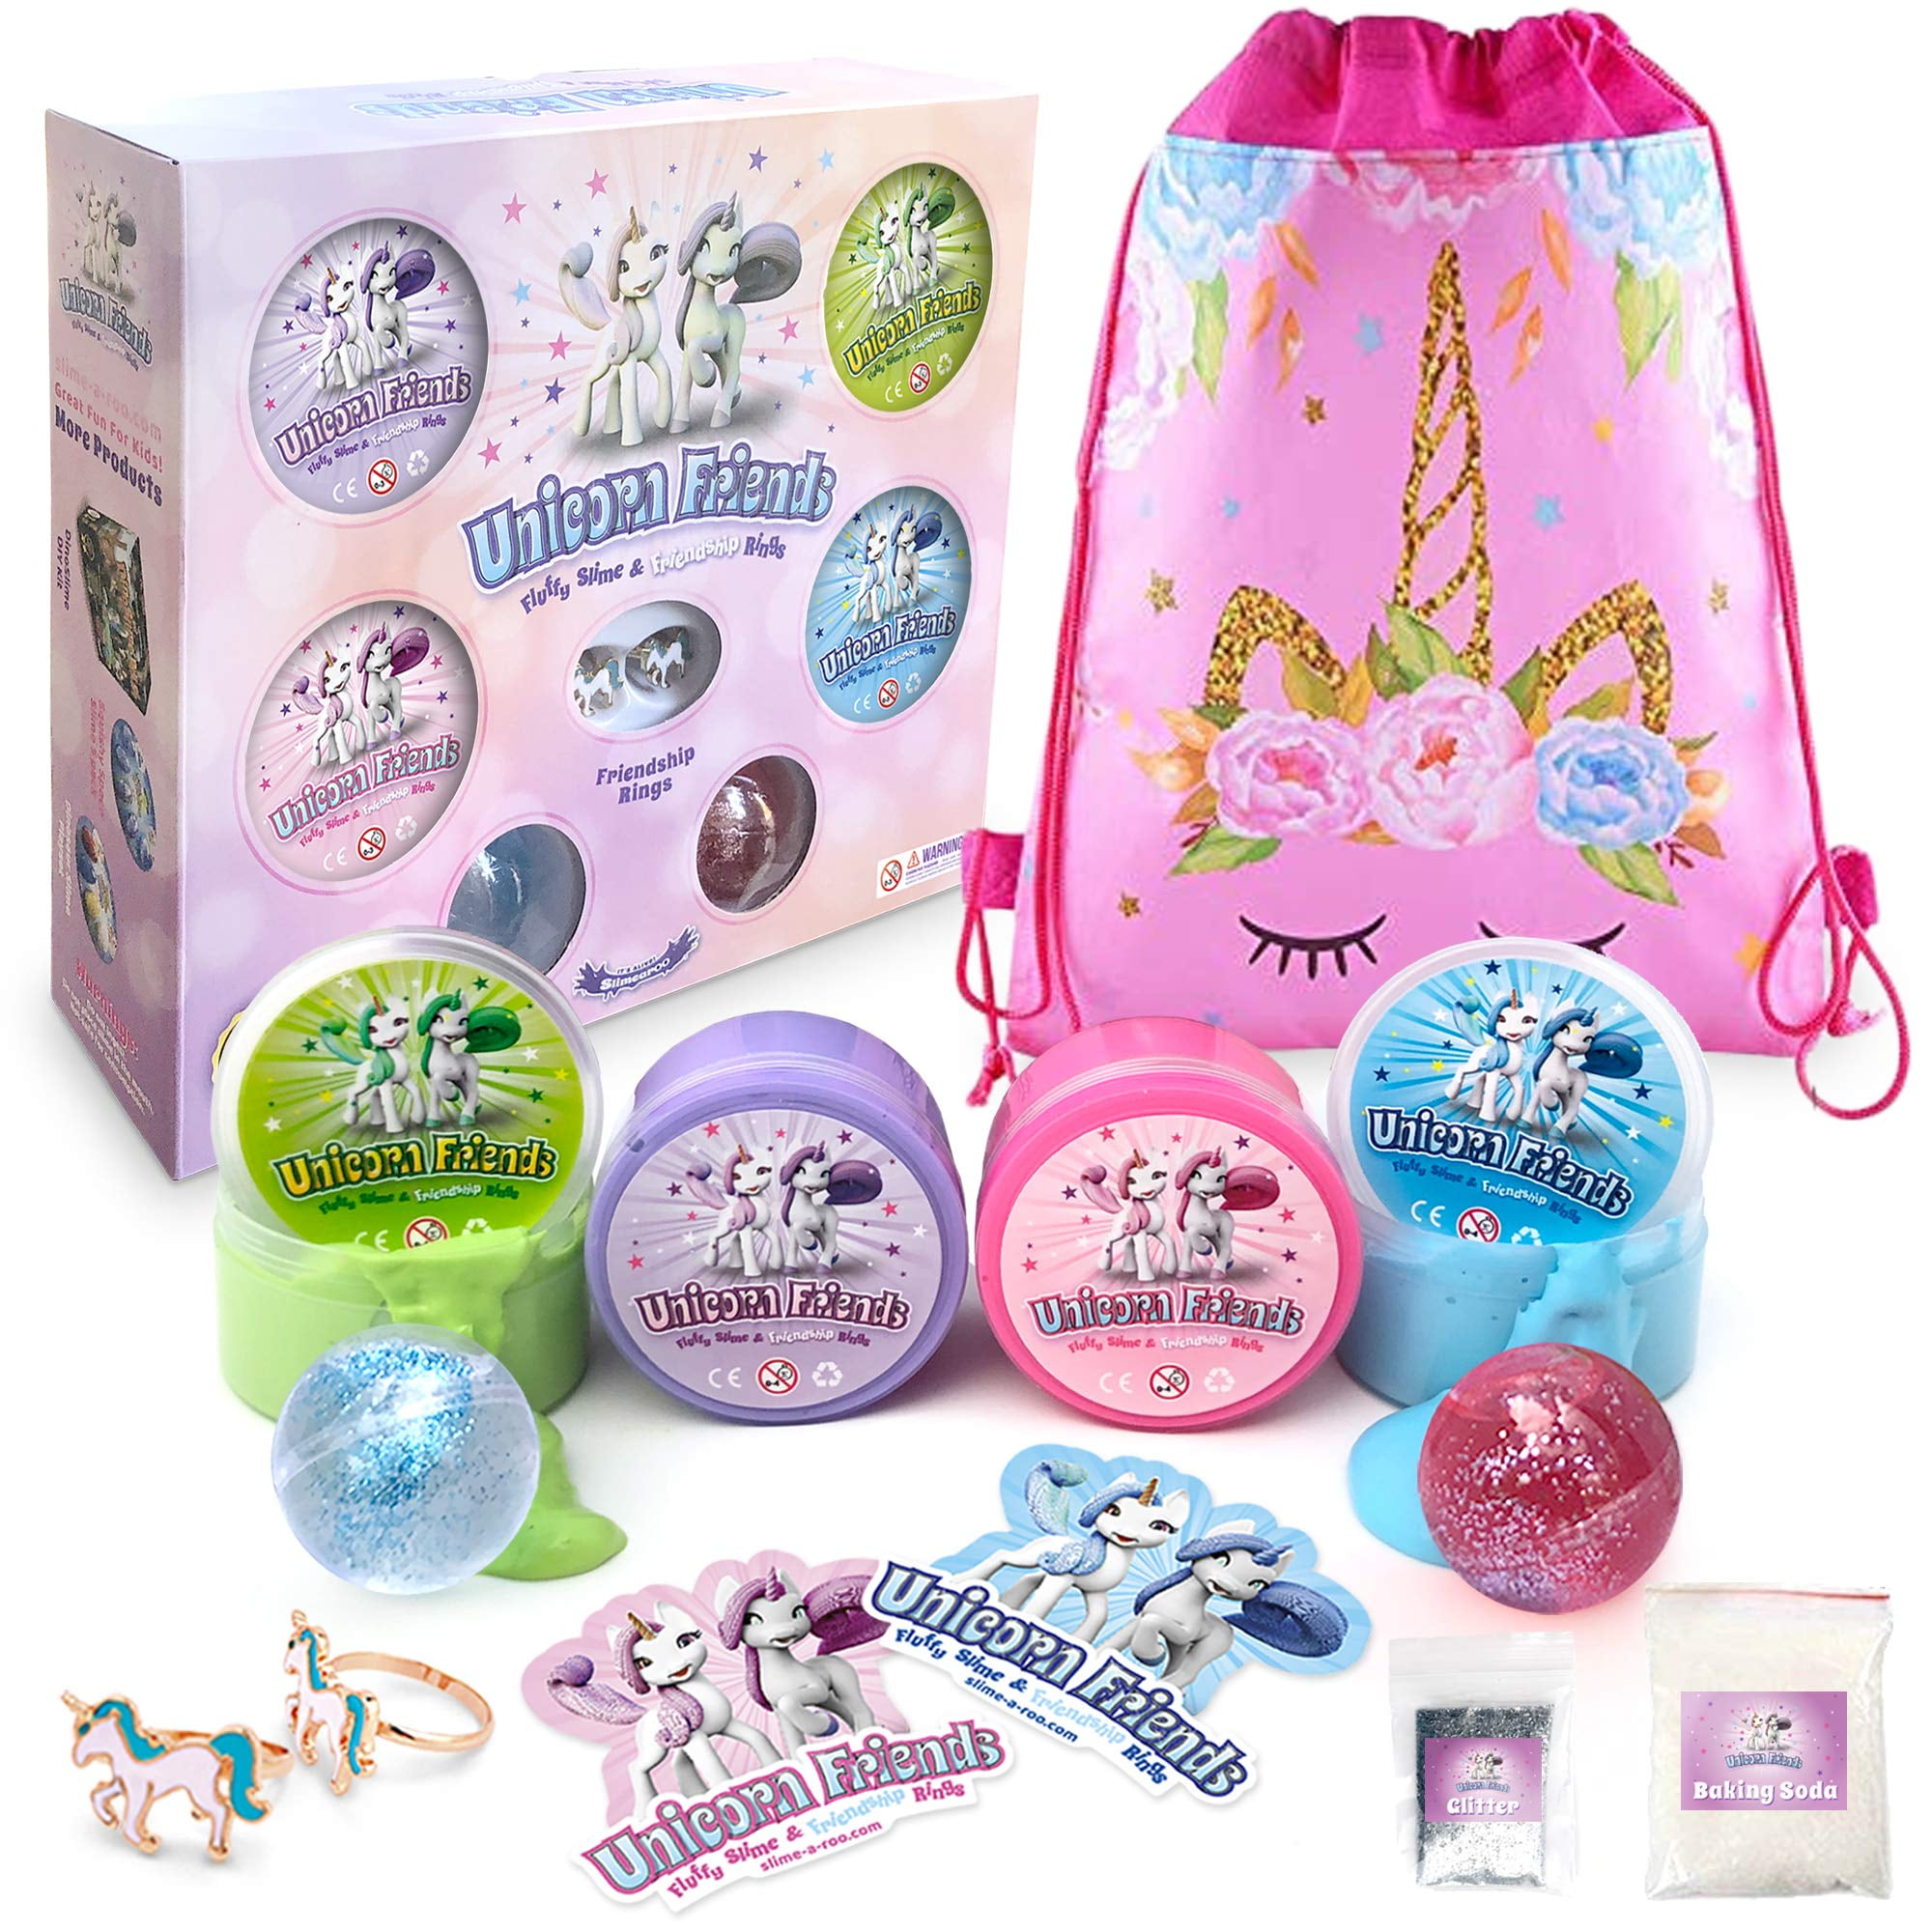 Kids love slime stuff Get your floam putty slimes for arts and craft. The Kiddy Corner unicorn poop slime kit for girls Get your unicorn scented sludge cloud slime kits Great gift for girls 10 years 